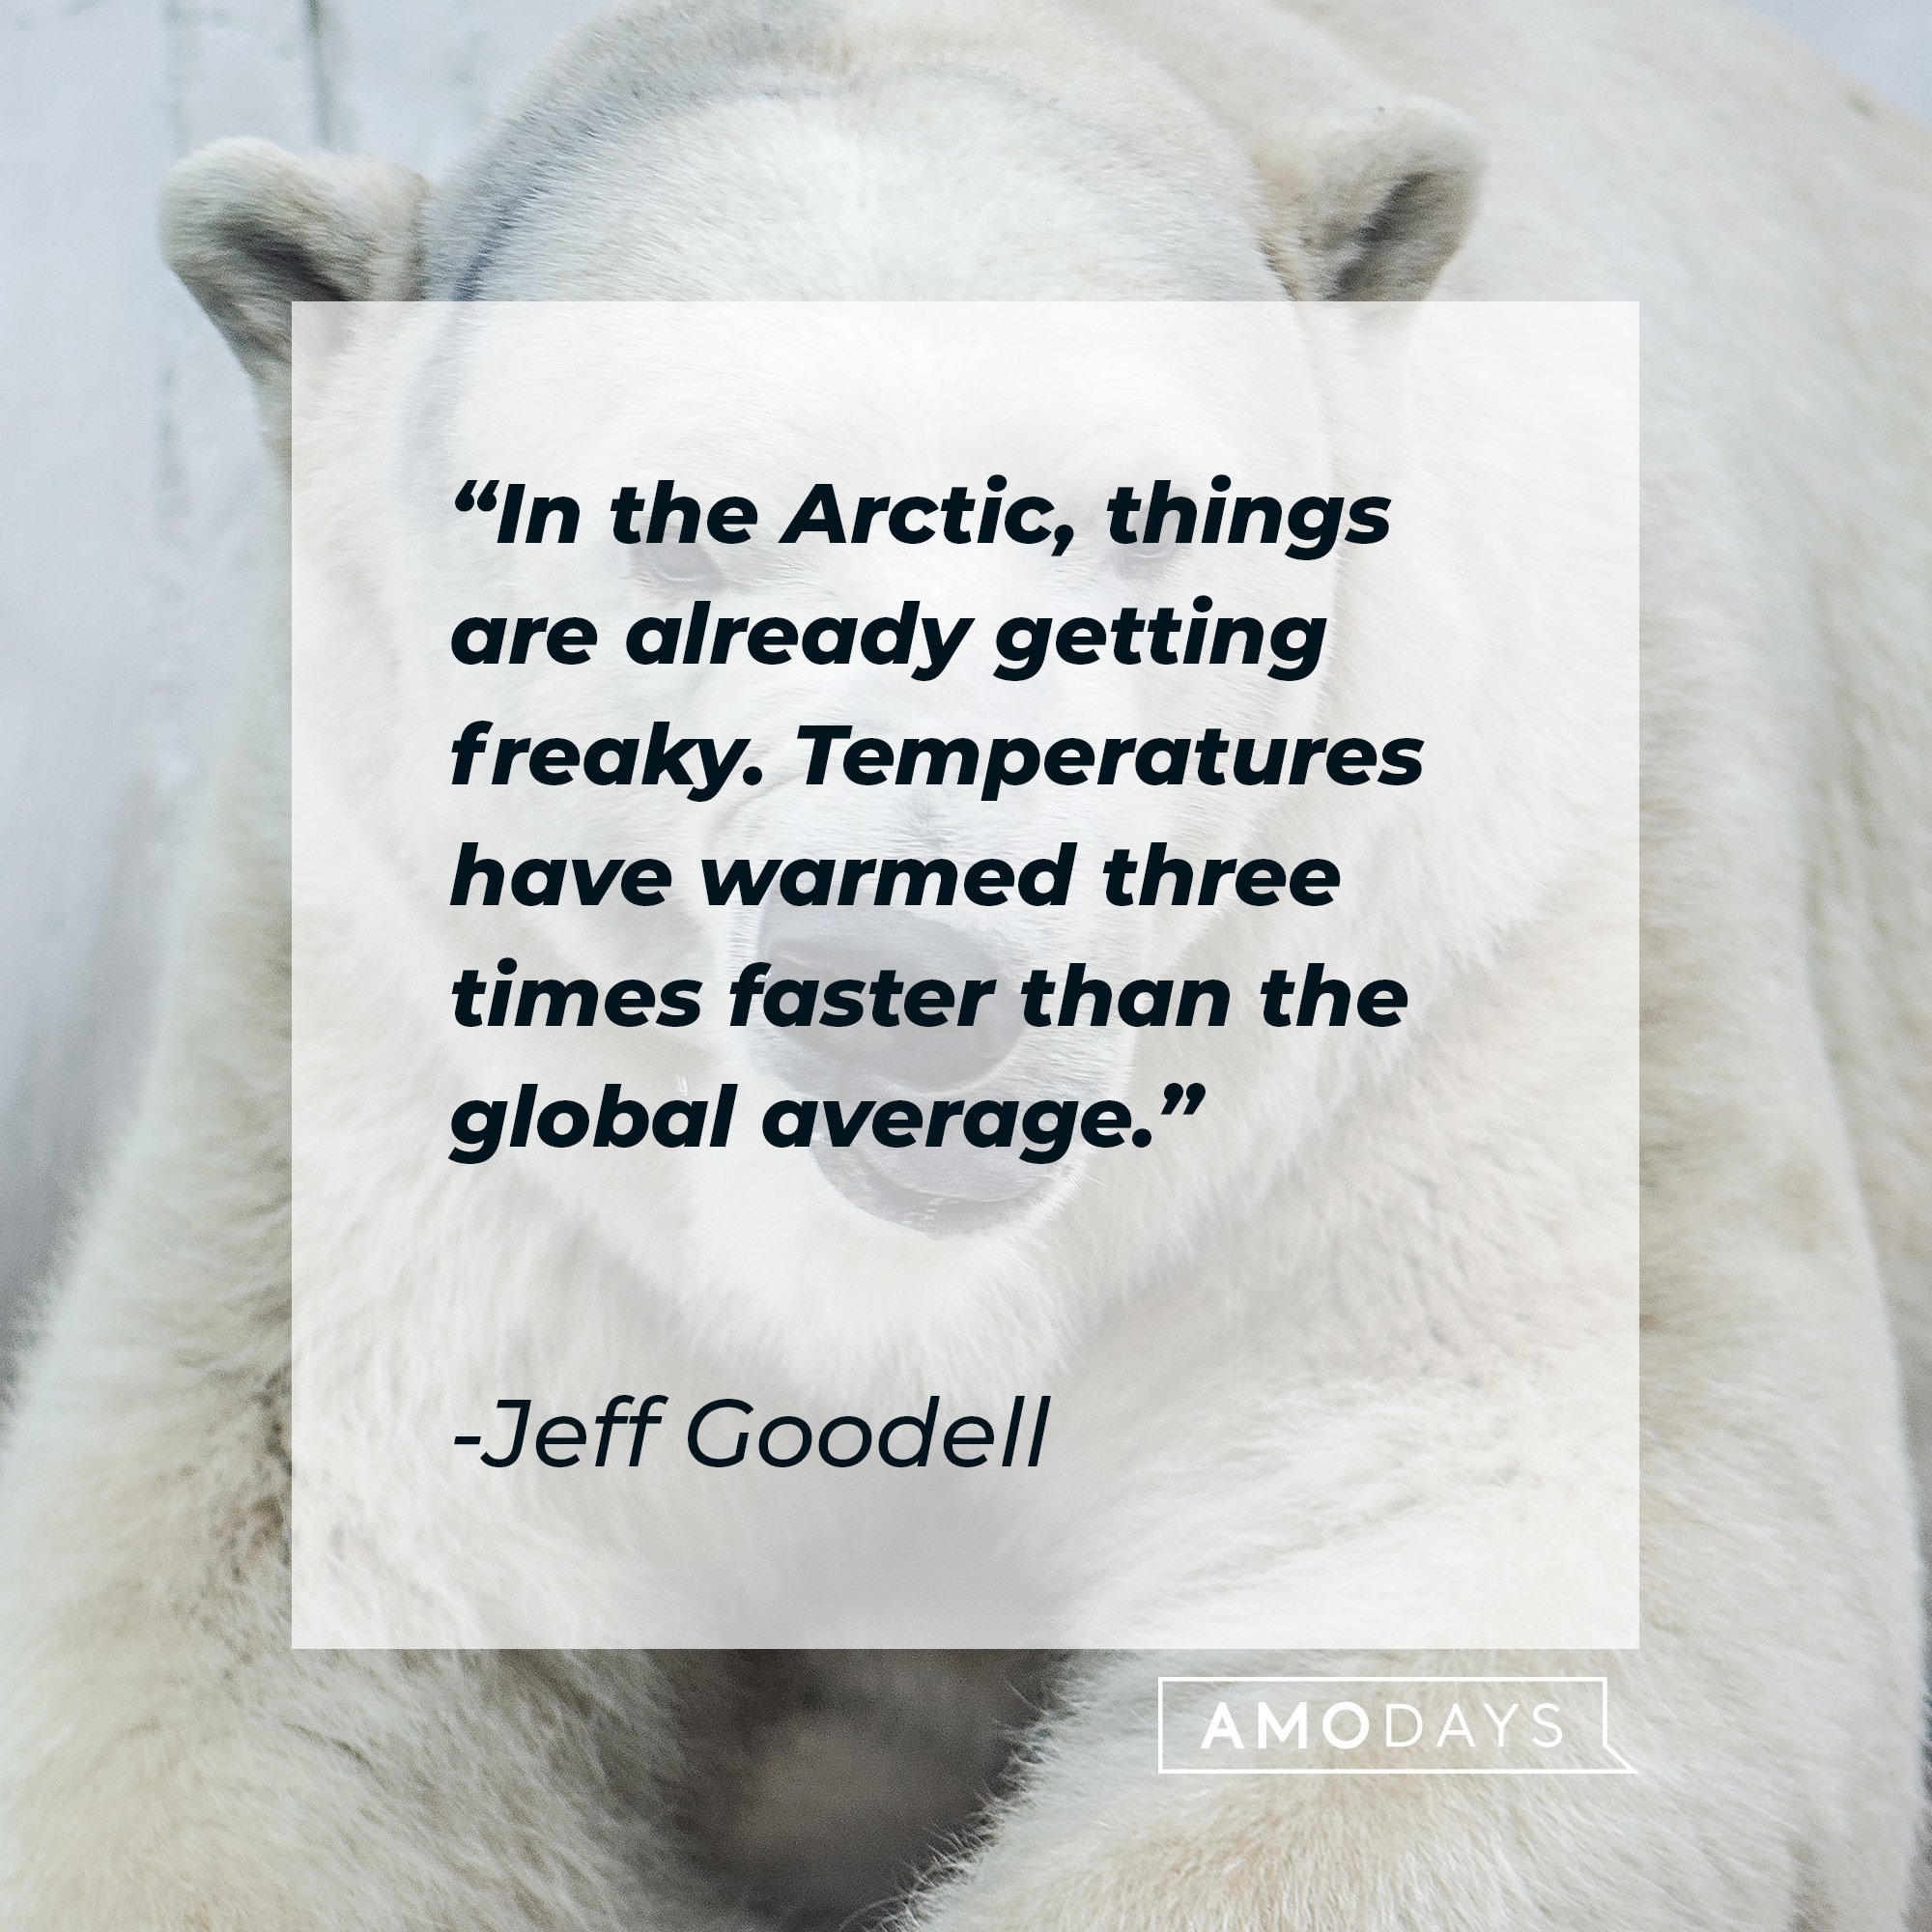 Jeff Goodell’s quote: "In the Arctic, things are already getting freaky. Temperatures have warmed three times faster than the global average." | Image: AmoDays